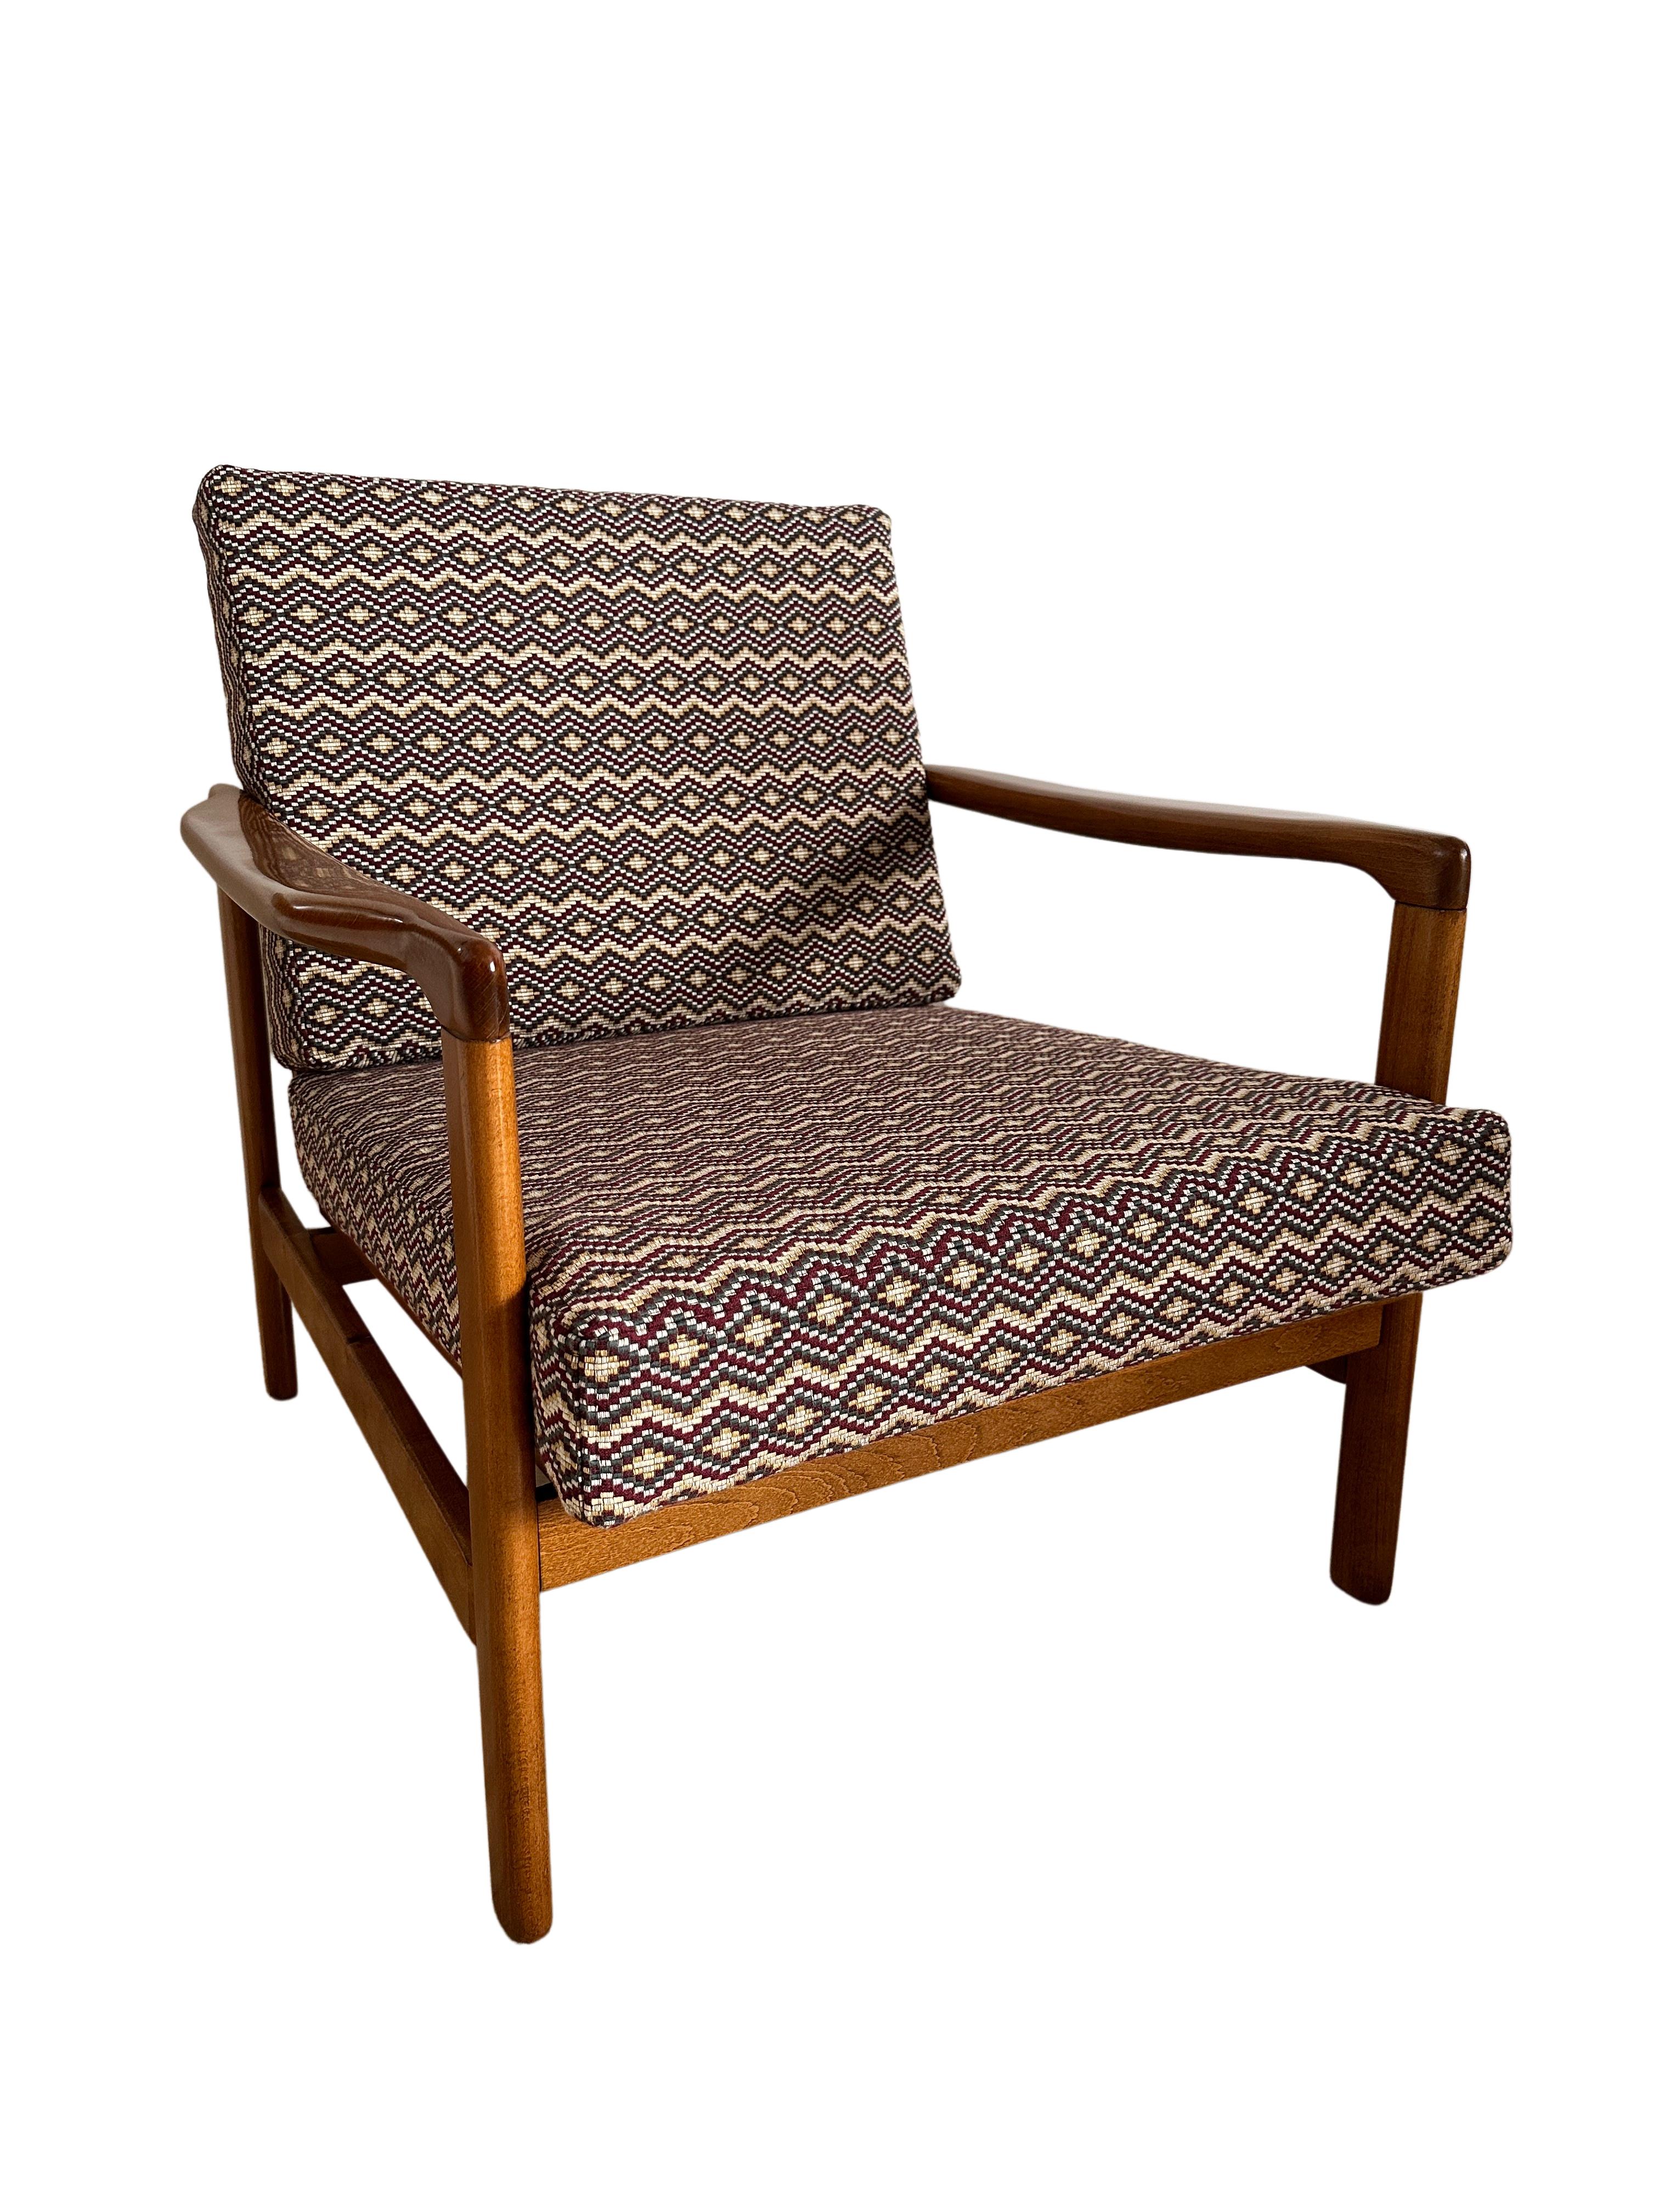 Midcentury Armchair, in Geometric and Ethnic Fabric, Europe, 1960s For Sale 10